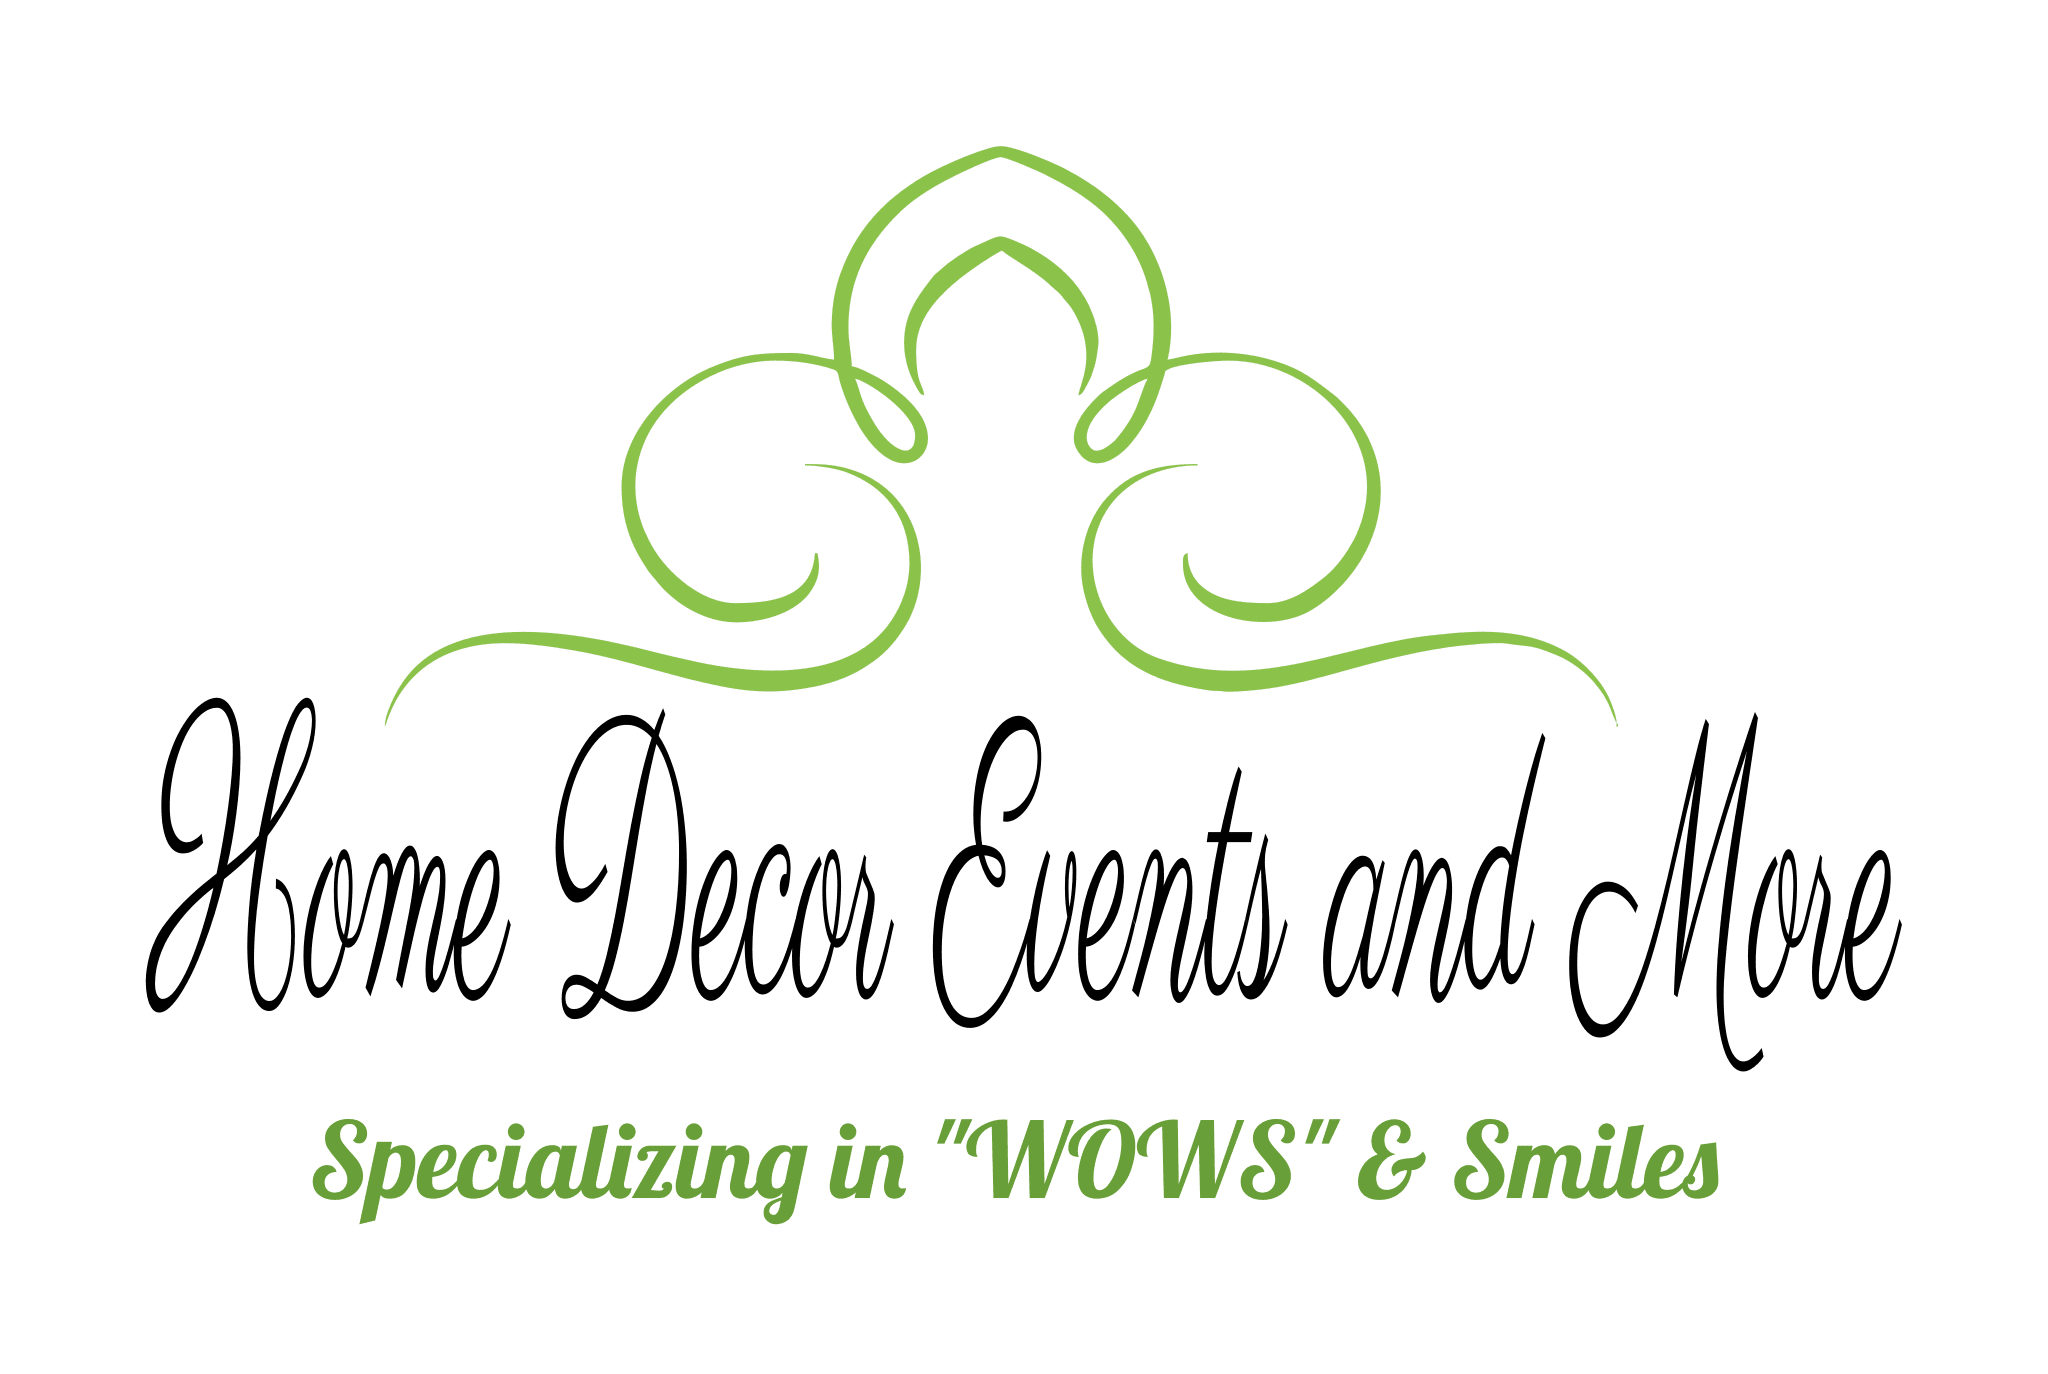 Home Decor Events and More